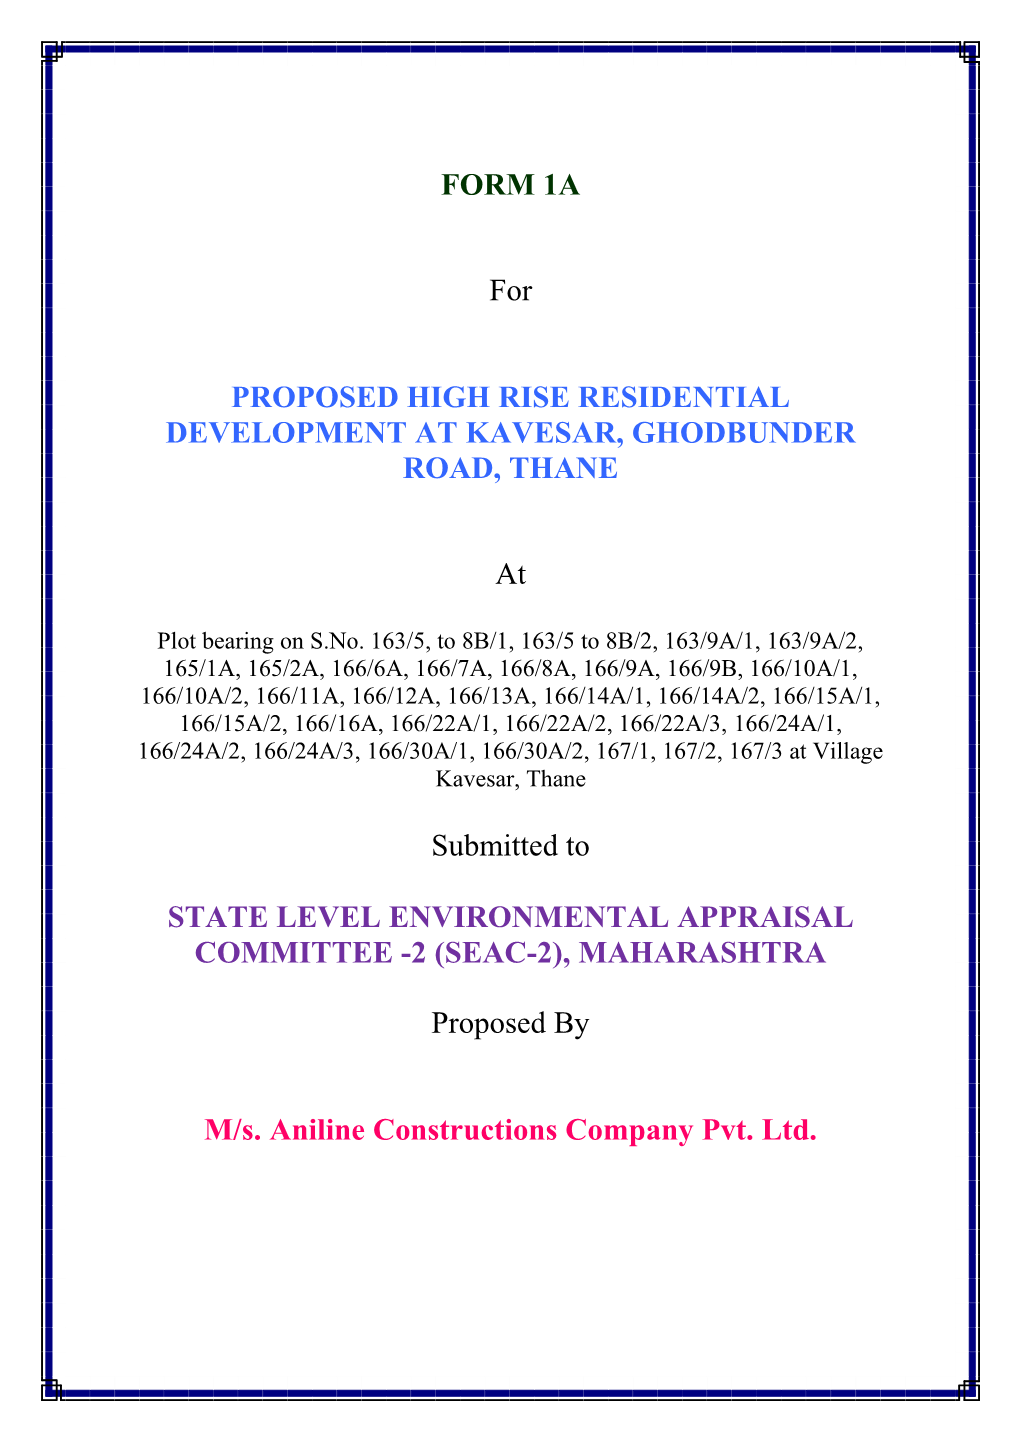 FORM 1A for PROPOSED HIGH RISE RESIDENTIAL DEVELOPMENT